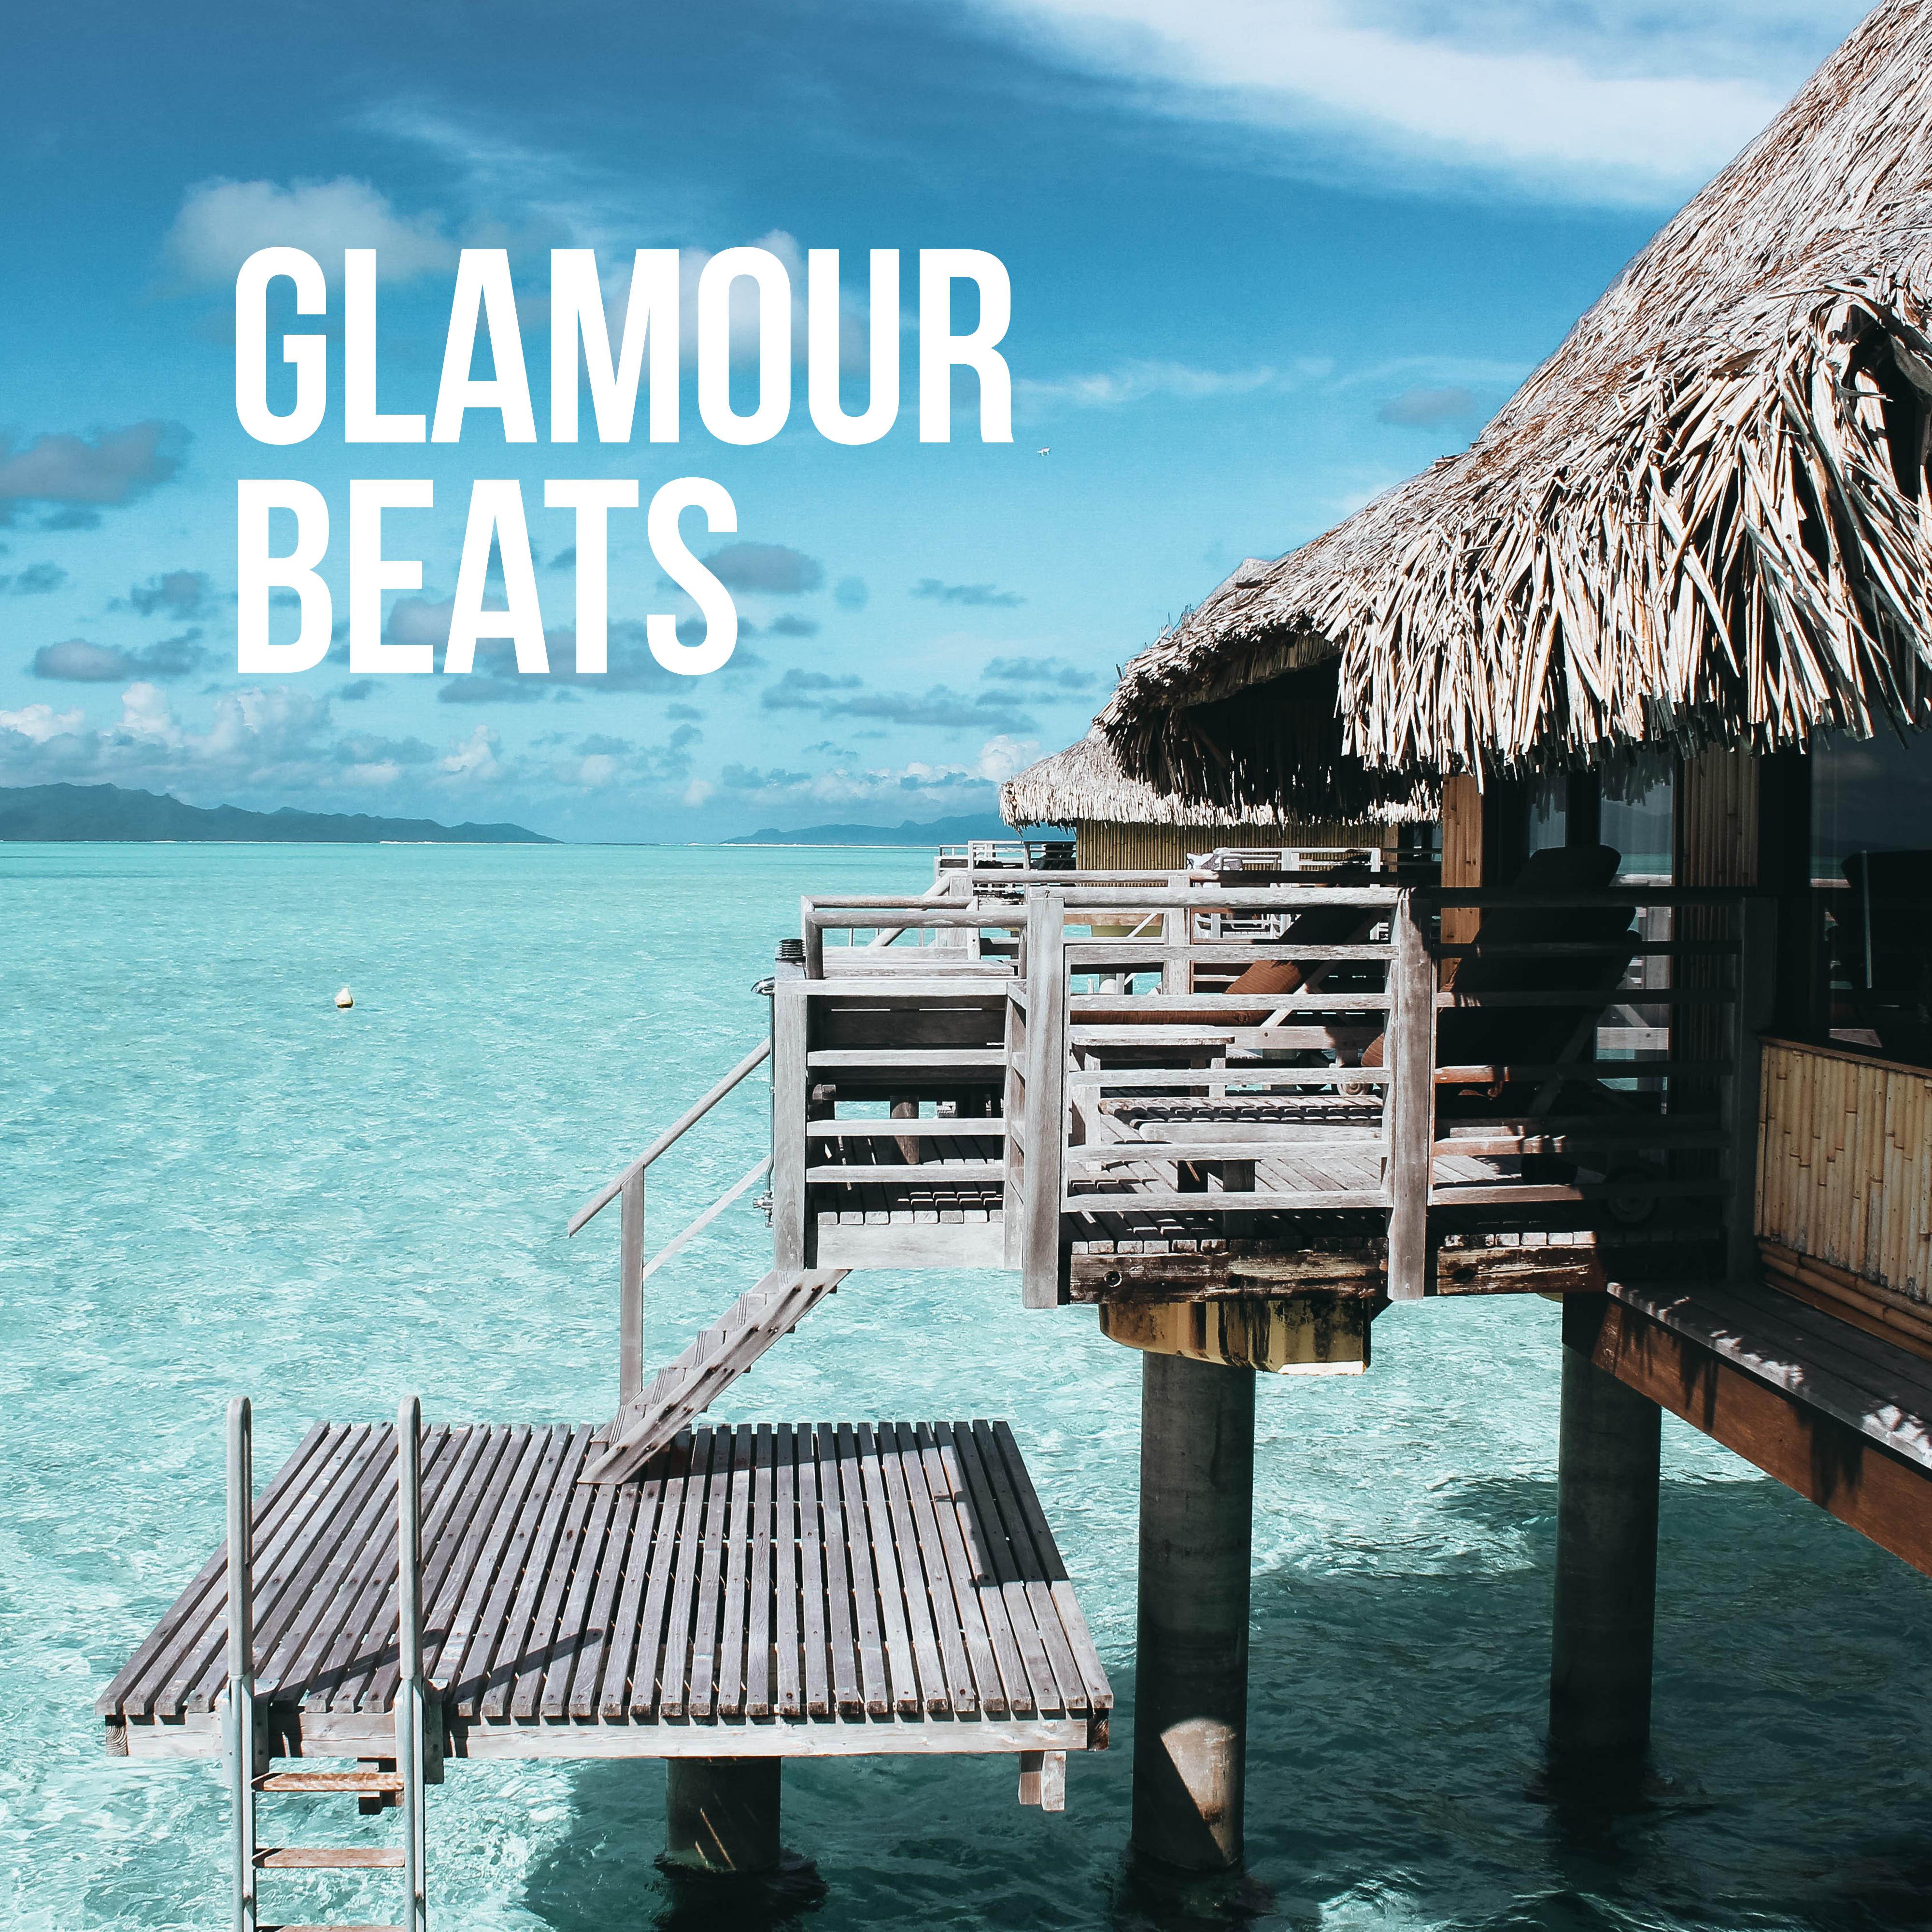 Glamour Beats: Luxury Chillout for Relaxation, Beach Music, Holiday Relaxation, Summertime, Ibiza 2019